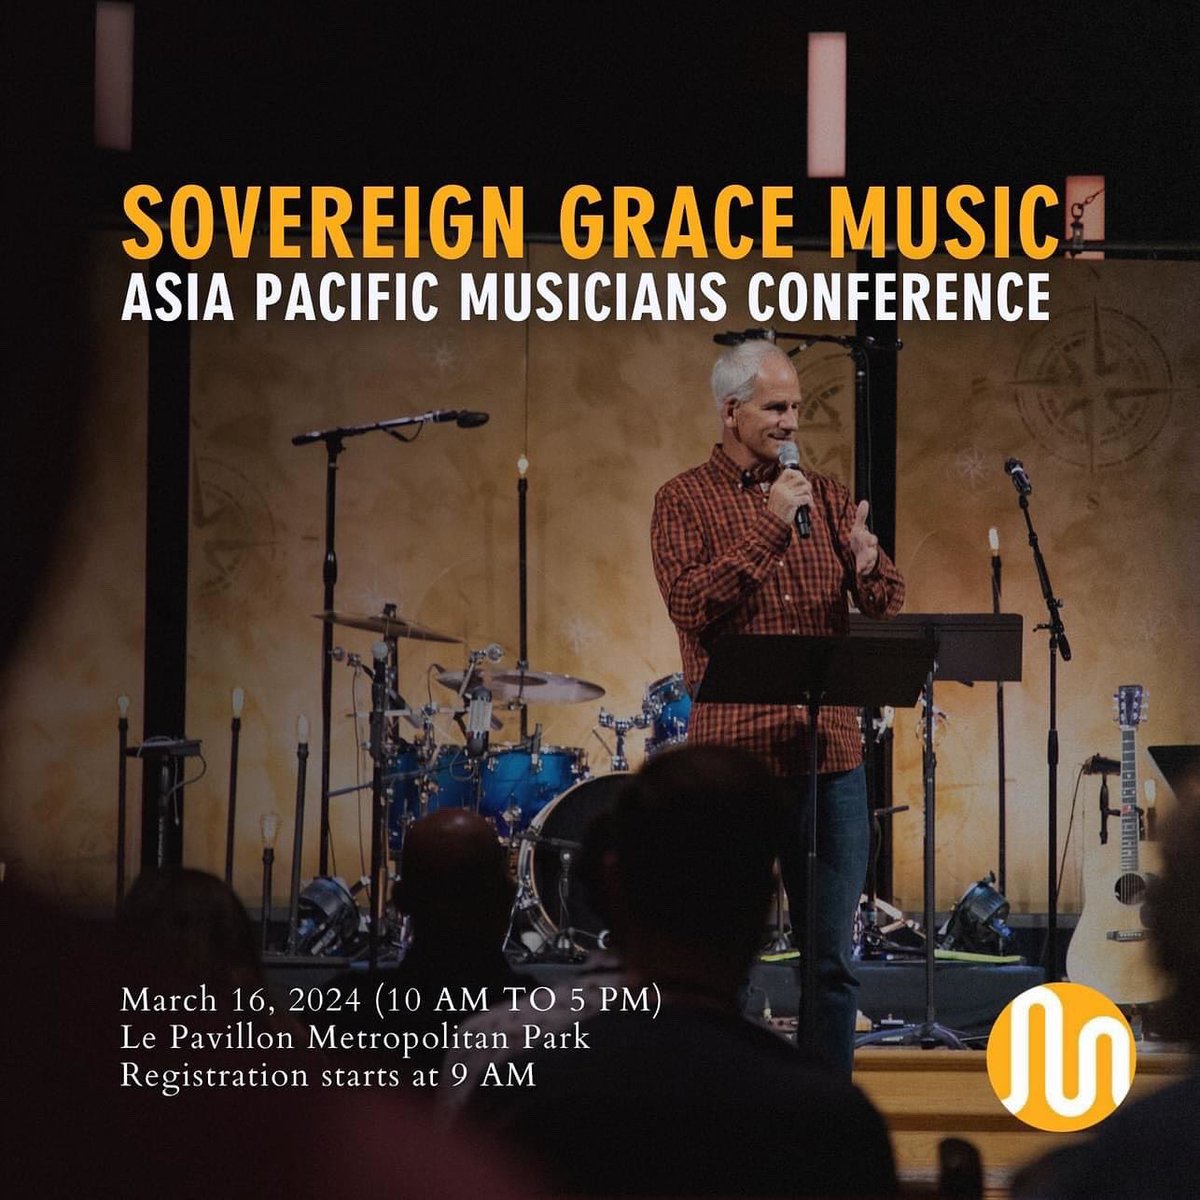 Please pray for @bkauflin, Devon, and I as we lead our brothers & sisters in Scripture, songs, and prayer this Friday evening and a musicians conference on Saturday. May Christ be magnified in our midst!! He is worthy. Rev 7:9.